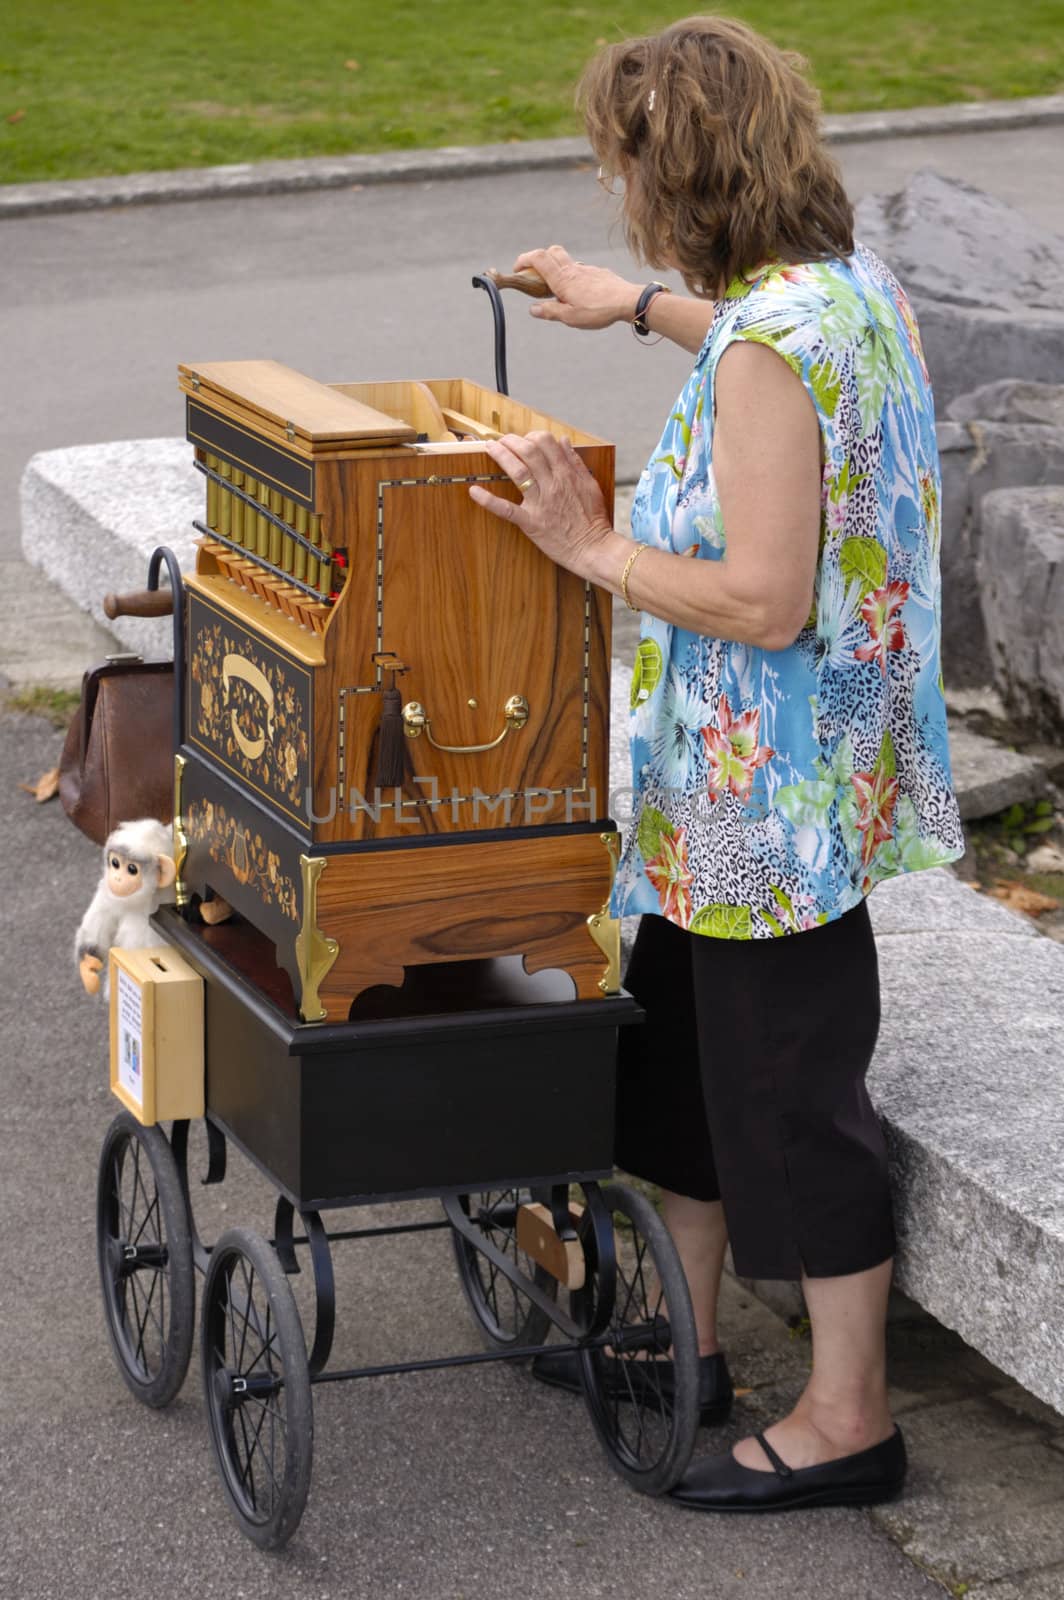 A woman barrel organ player, complete with monkey, playing her music to an empty street.